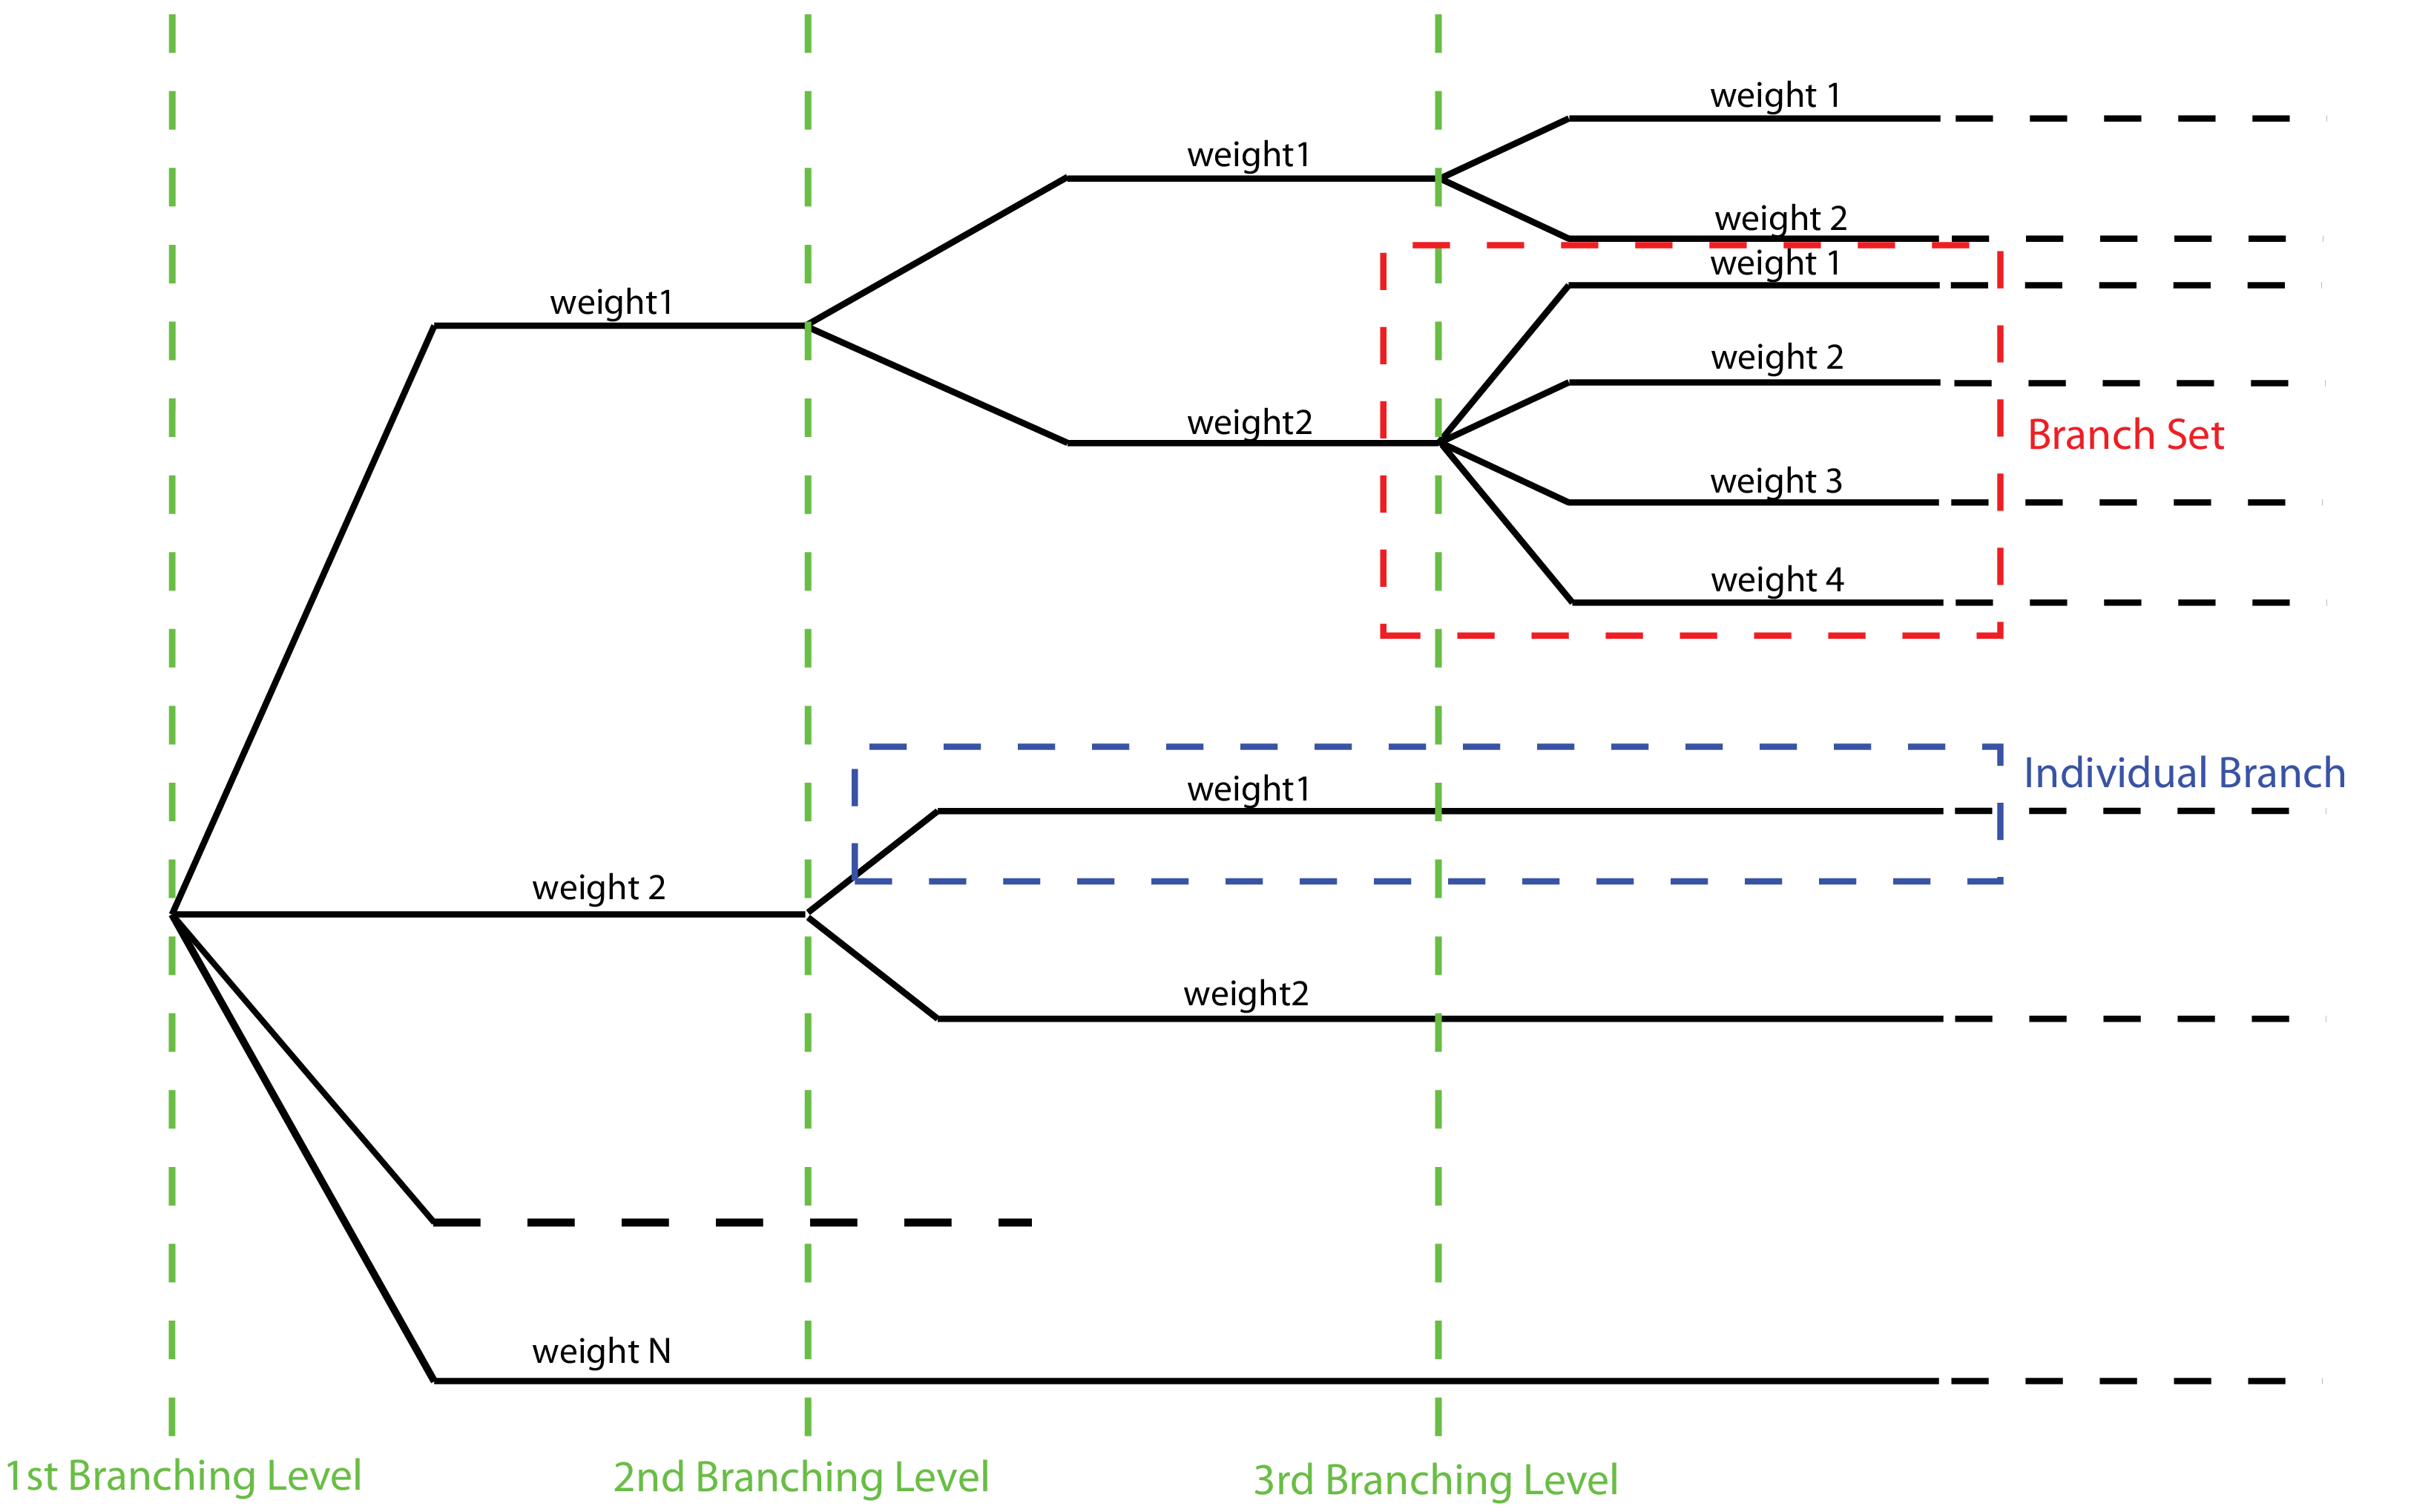 ../../_images/GenericLogicTreeStructure.png